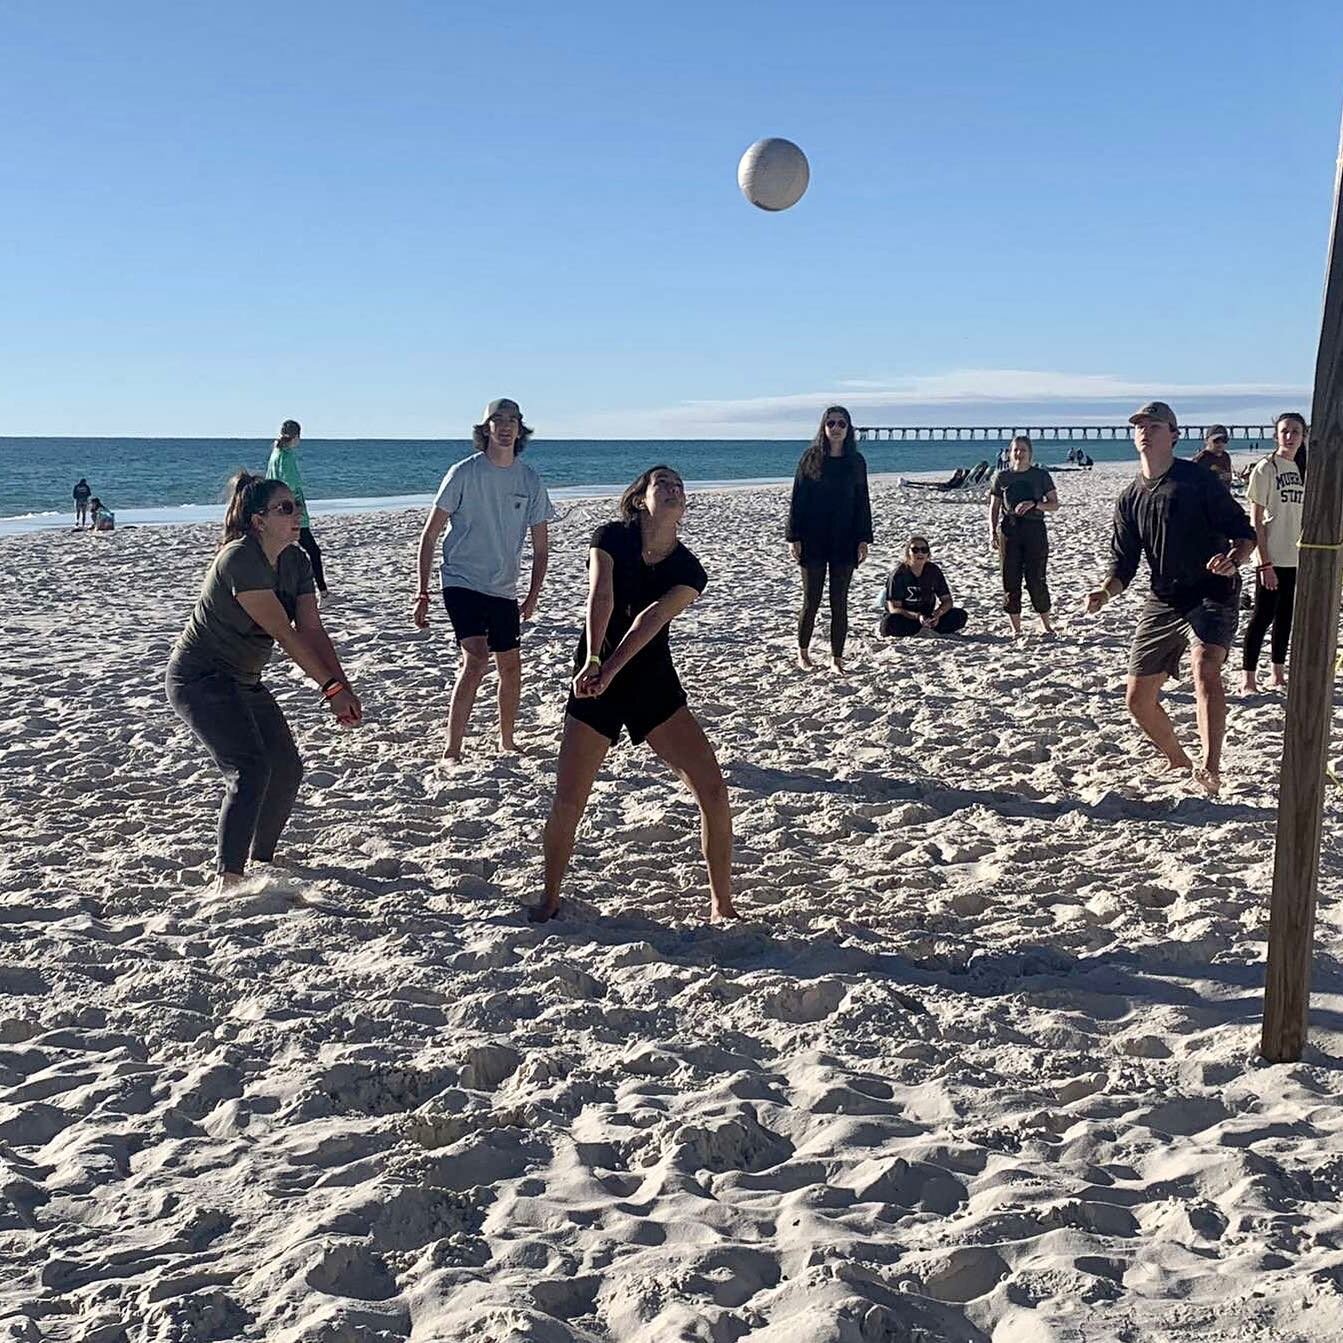 VOLLEYBALL
-
We started the semester with lots of volleyball at the beach. Hoping the weather will give us a break next week so we can finish some volleyball in the back yard. 
-
Keep at it this weekend. Only a few more days! The work is worth it. 
-